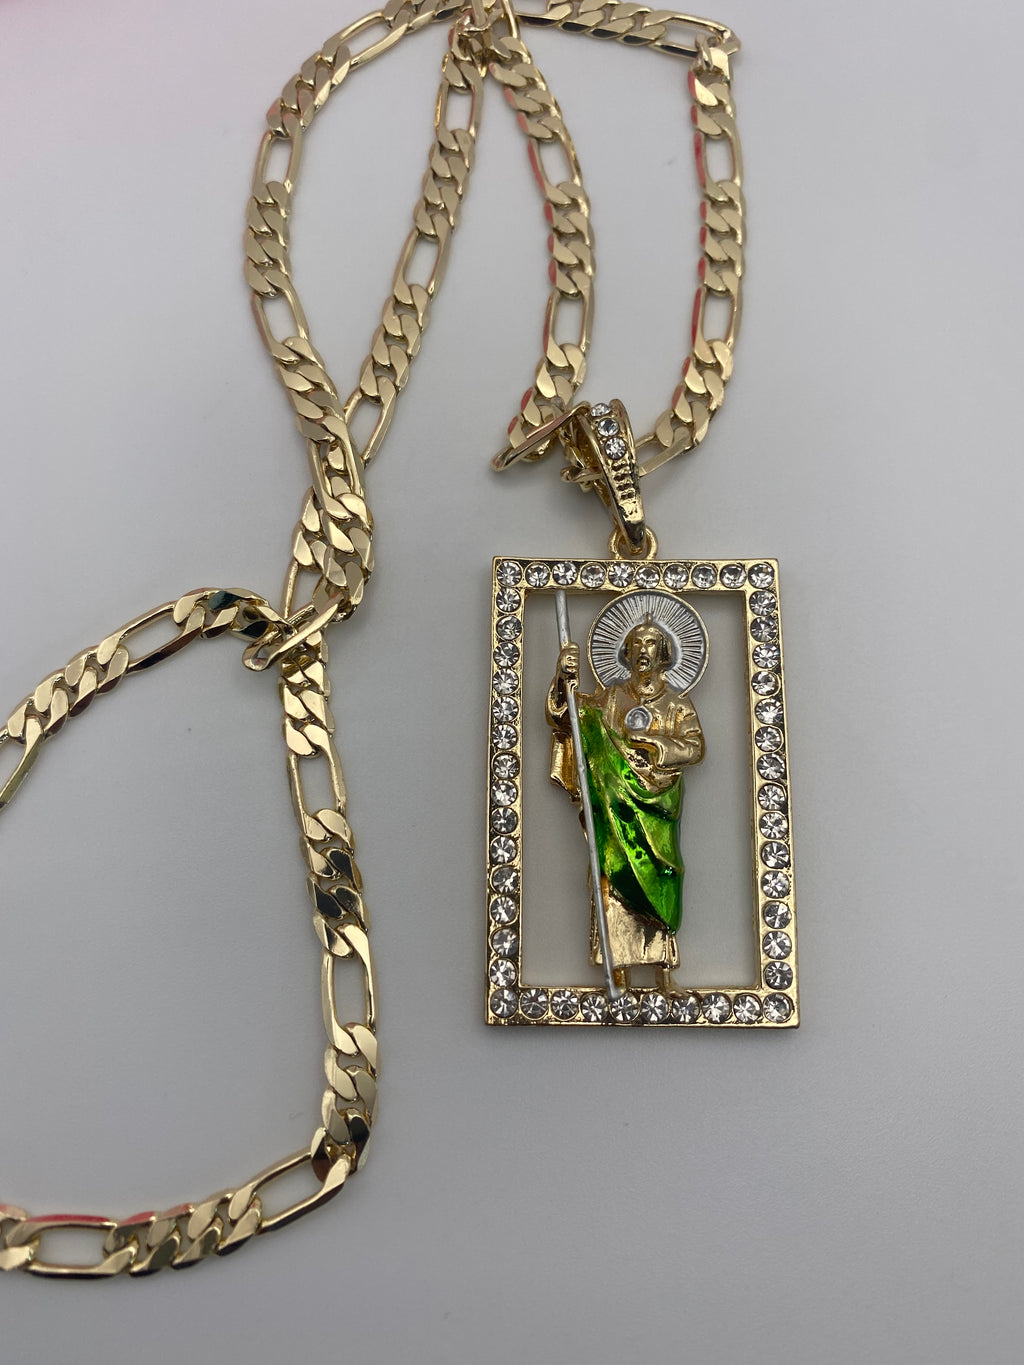 “Save me “ San Judas/ St Jude  Necklace Gold Plated